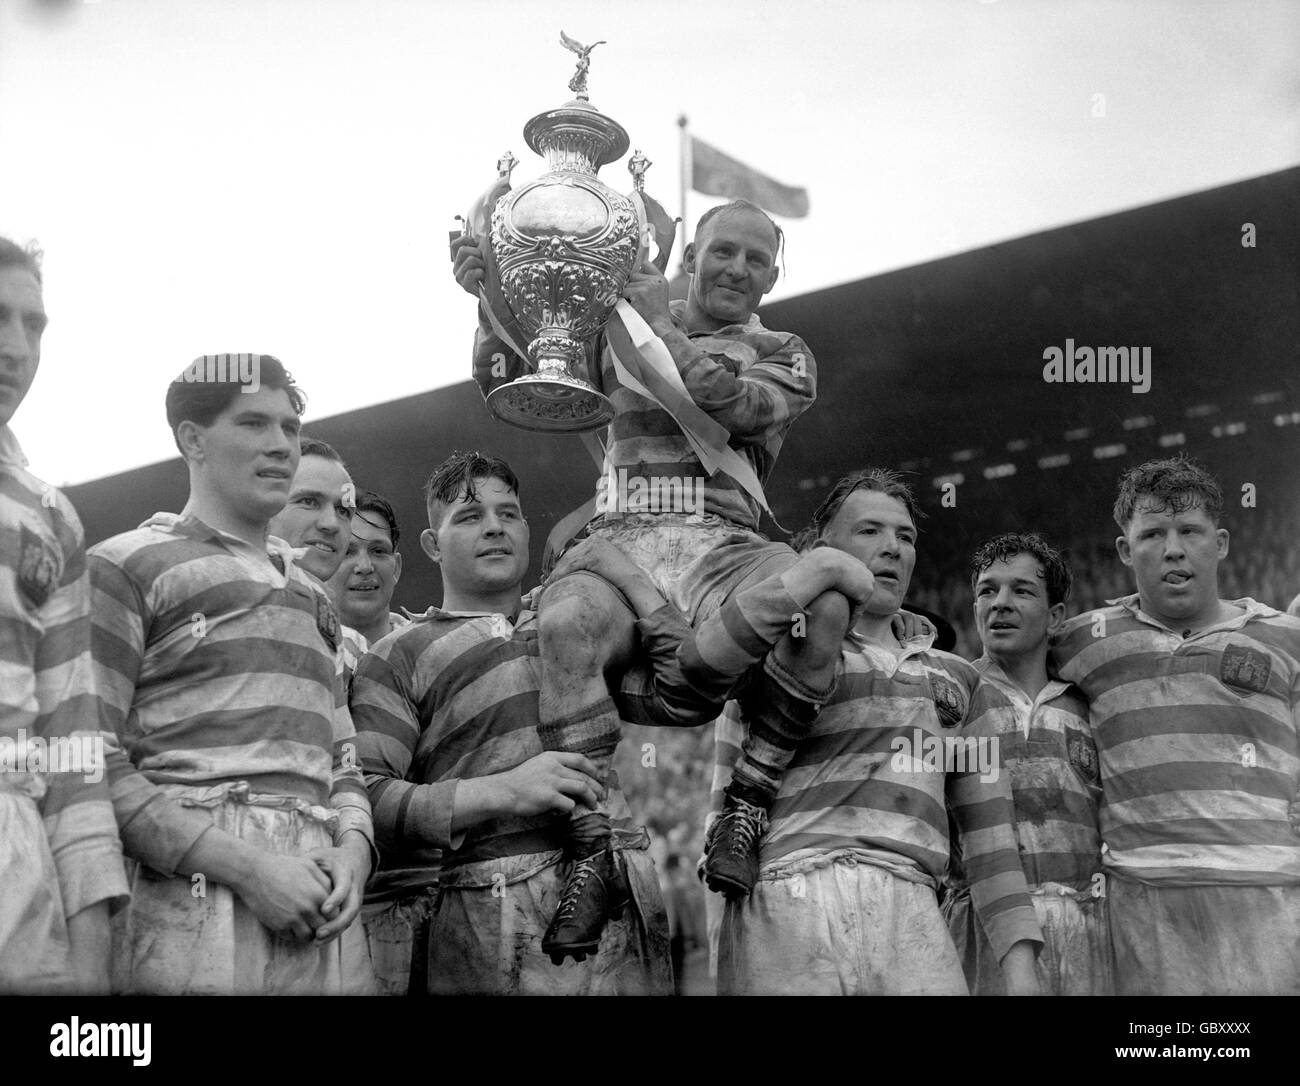 Cecil Mountford, Wigan rugby captain, is chaired by his team mates as he holds the Rugby League Cup at Wembley Stadium. Wigan beat Barrow 10-0. Stock Photo